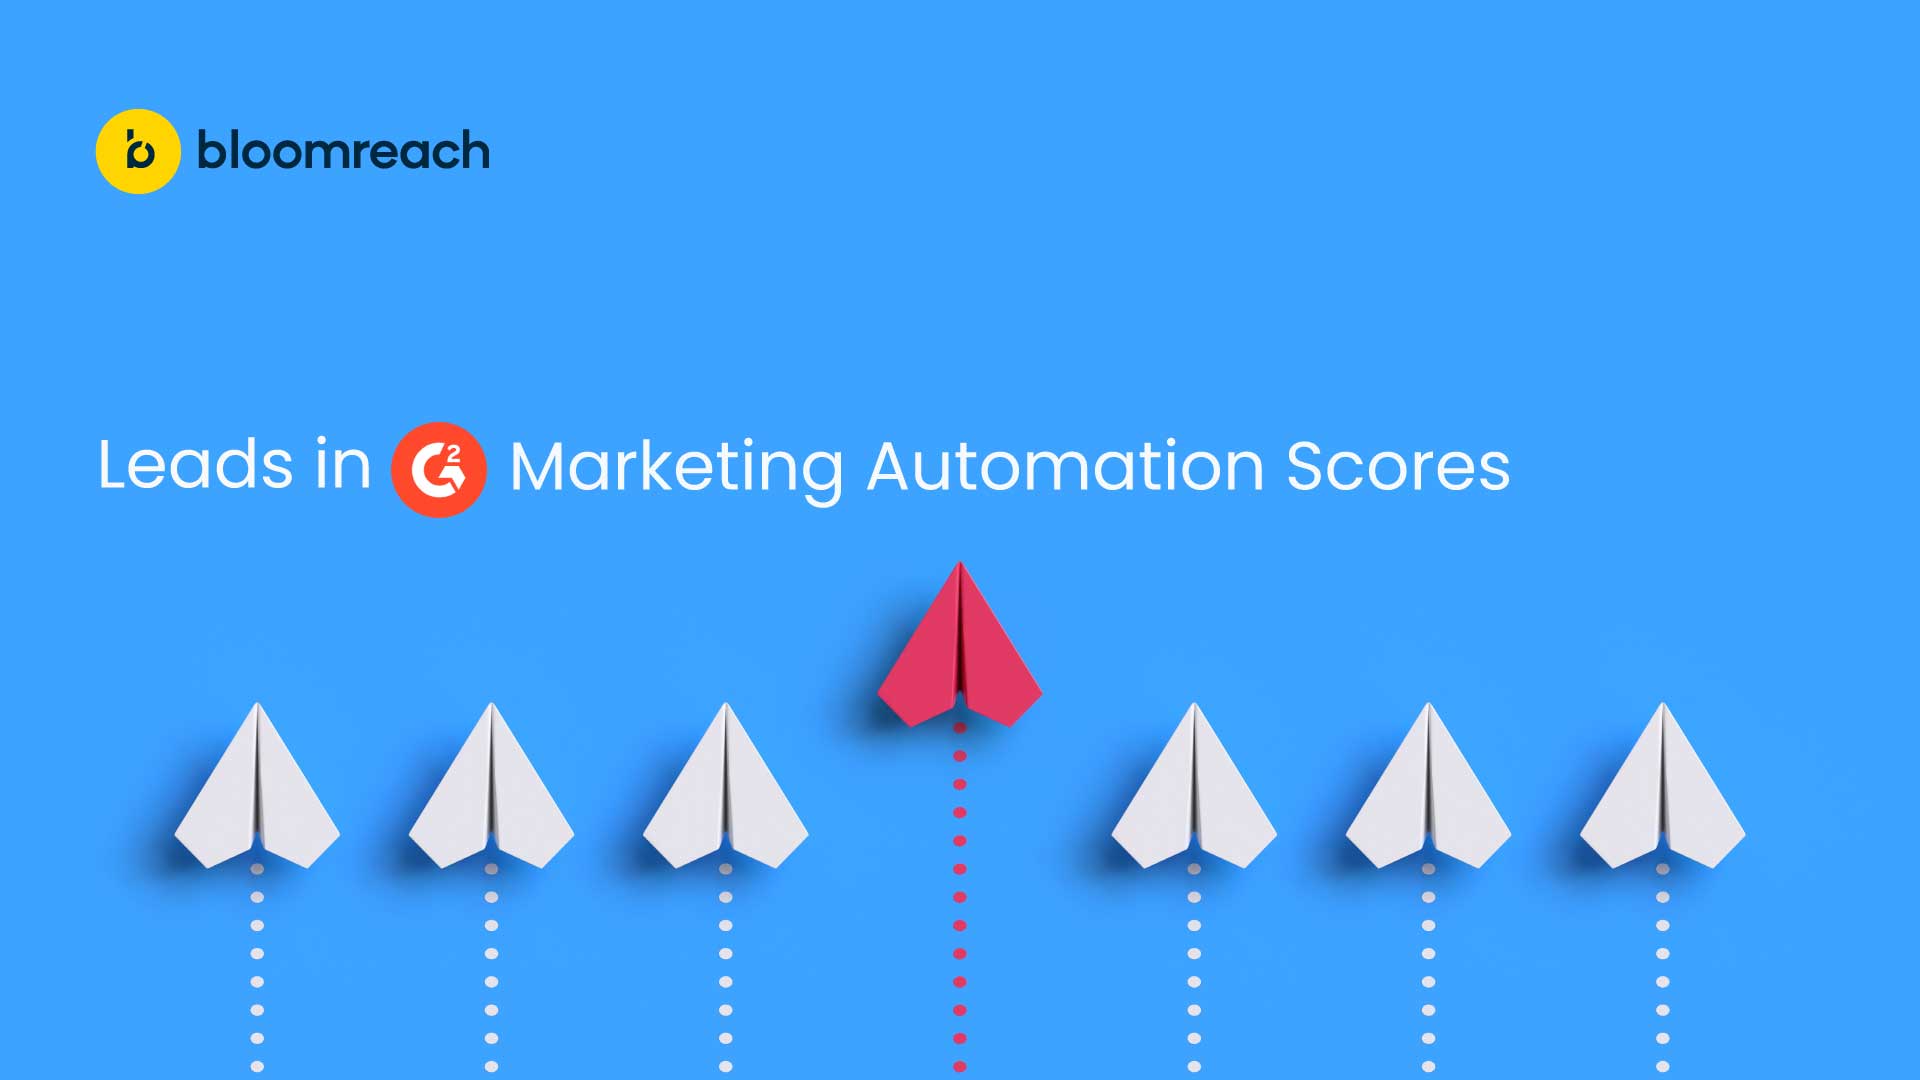 Bloomreach Leads in G2 Marketing Automation Scores for Quality Customer Support, Revenue Analytics, A/B Testing, and More